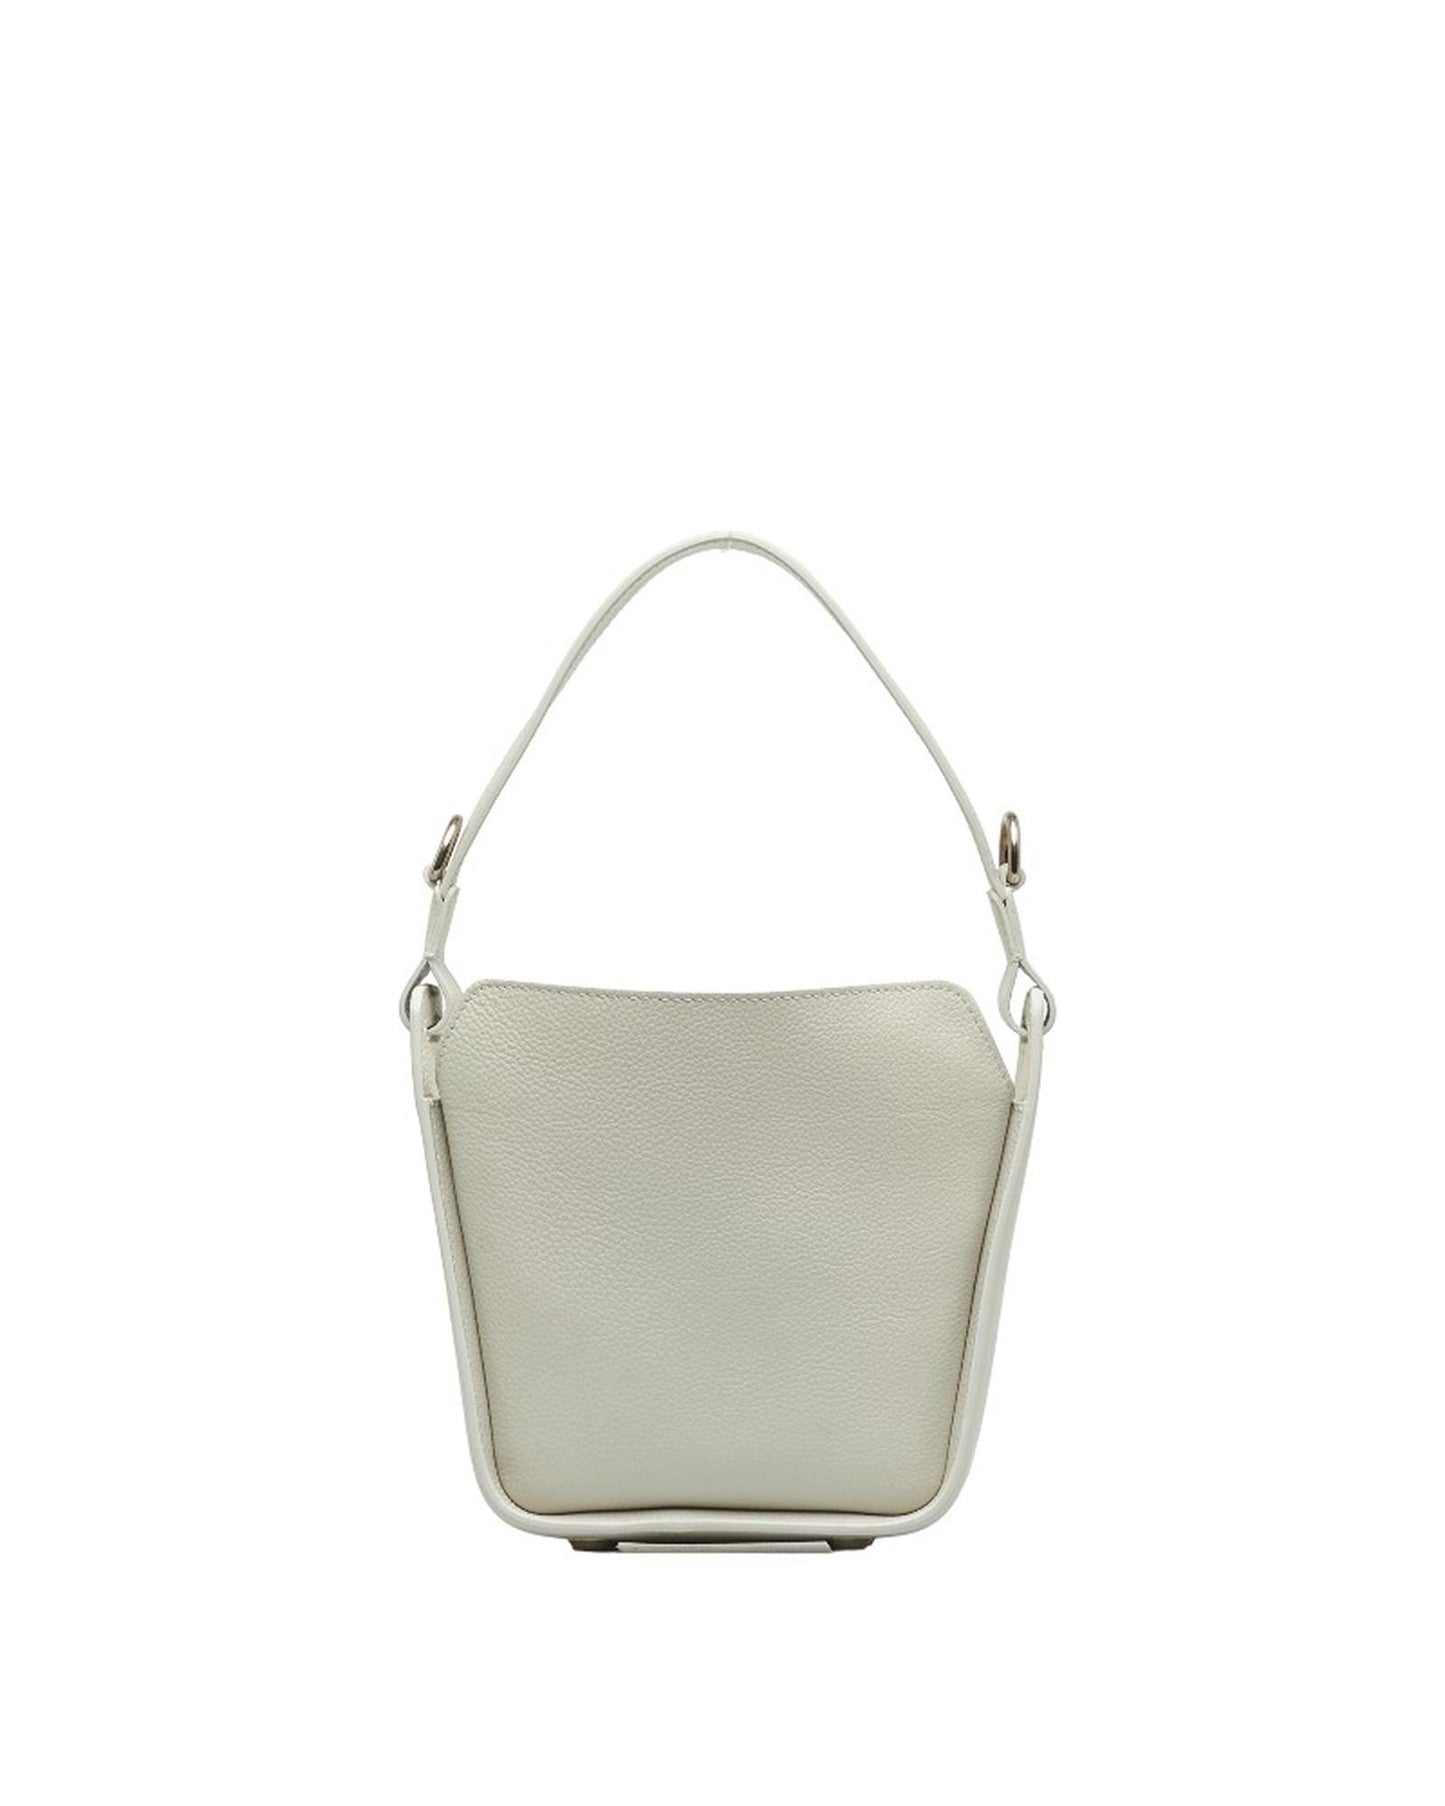 Balenciaga Women's White Leather North-South Tote Bag with Tool 2.0 in White